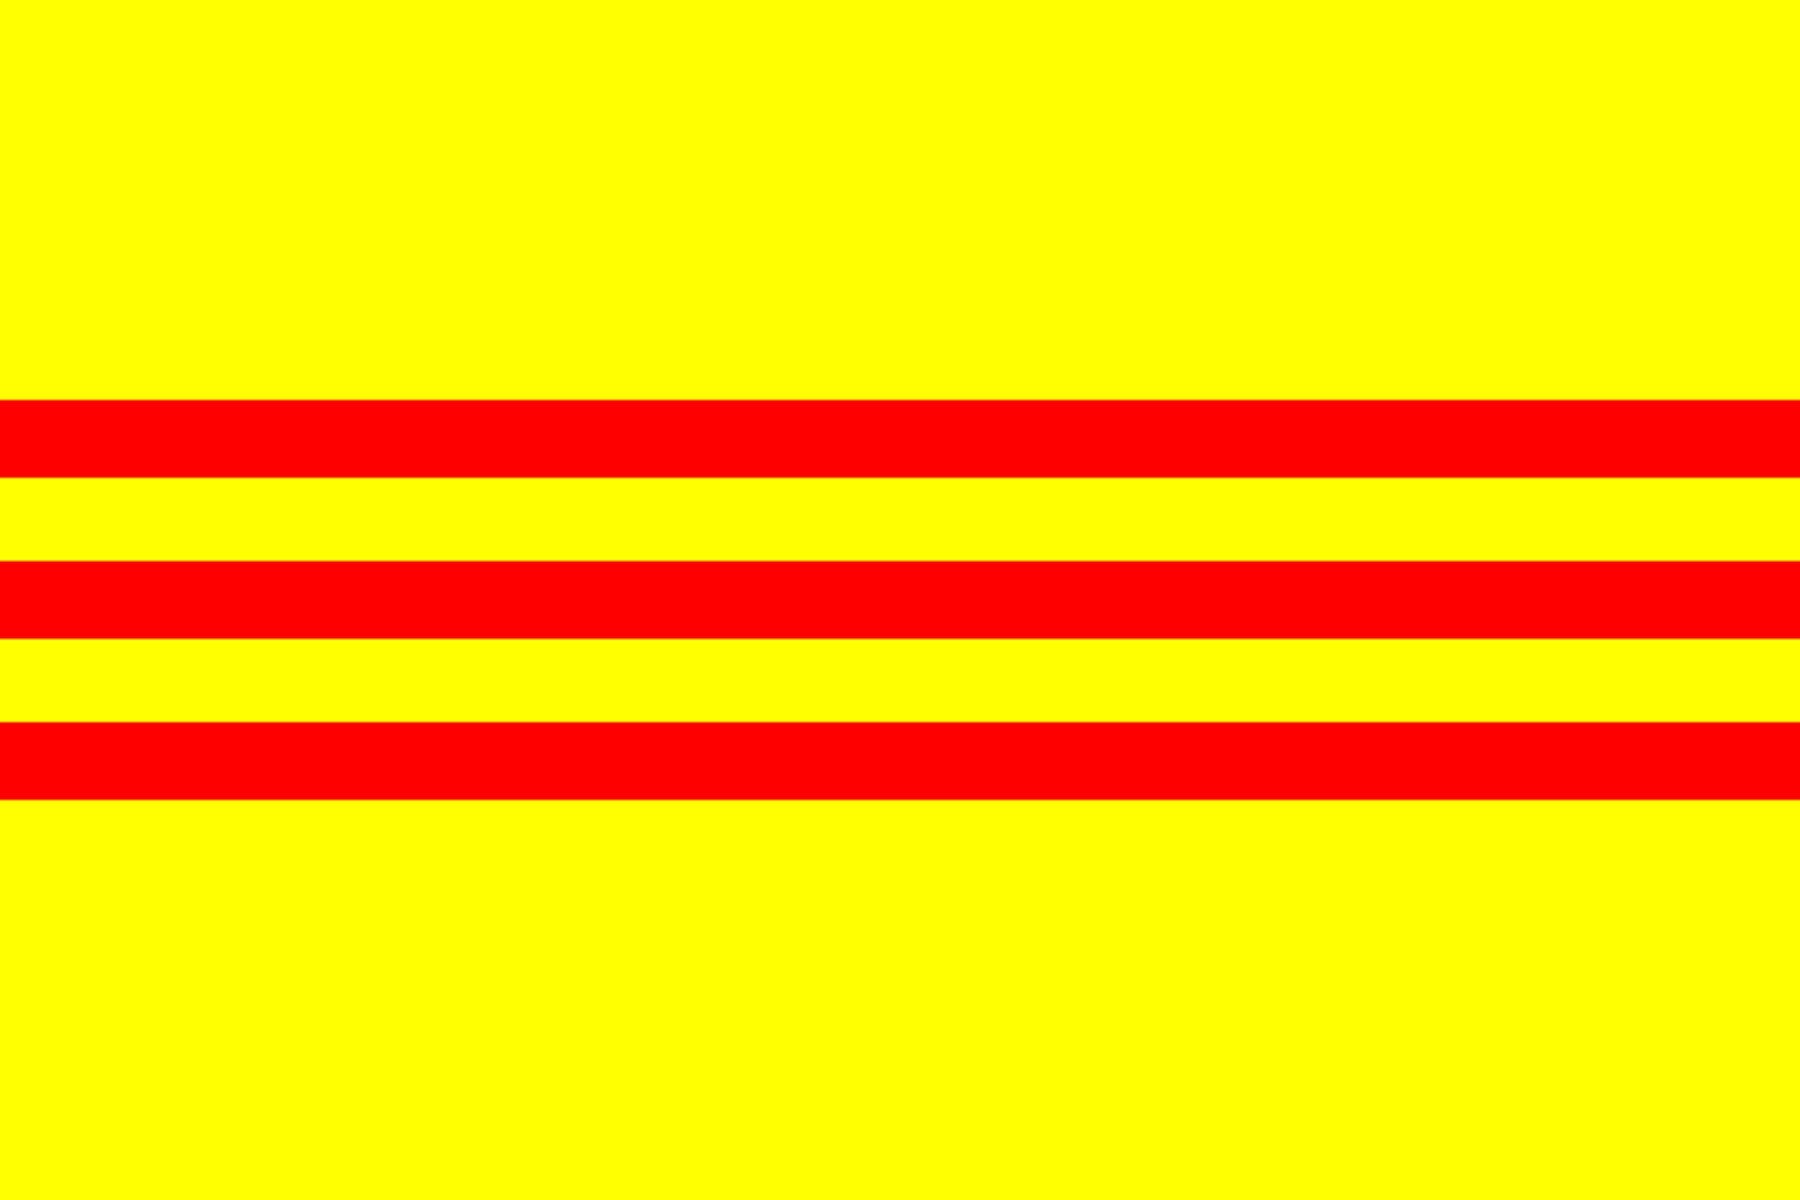 South Vietnam 3' x 5' Indoor Polyester Flag